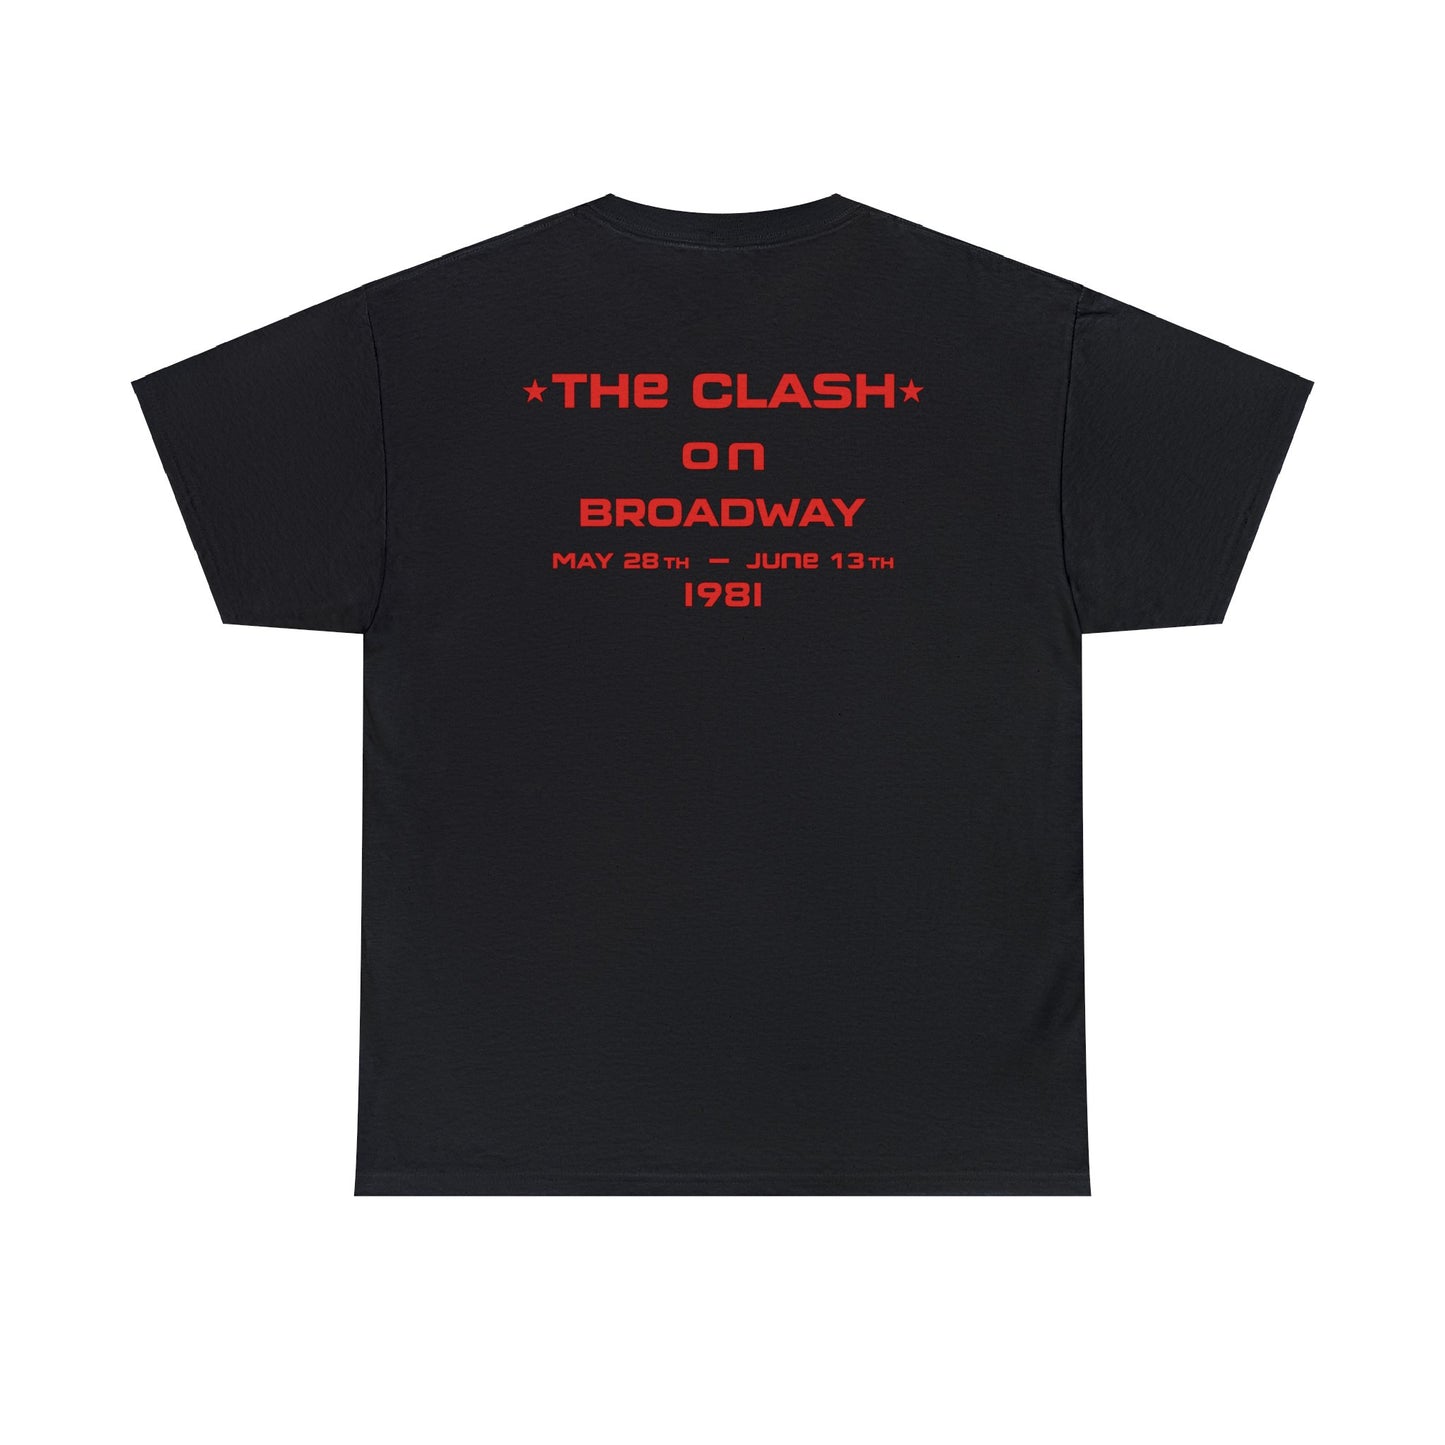 The Clash On Broadway Tour 1981 T-shirt for Sale